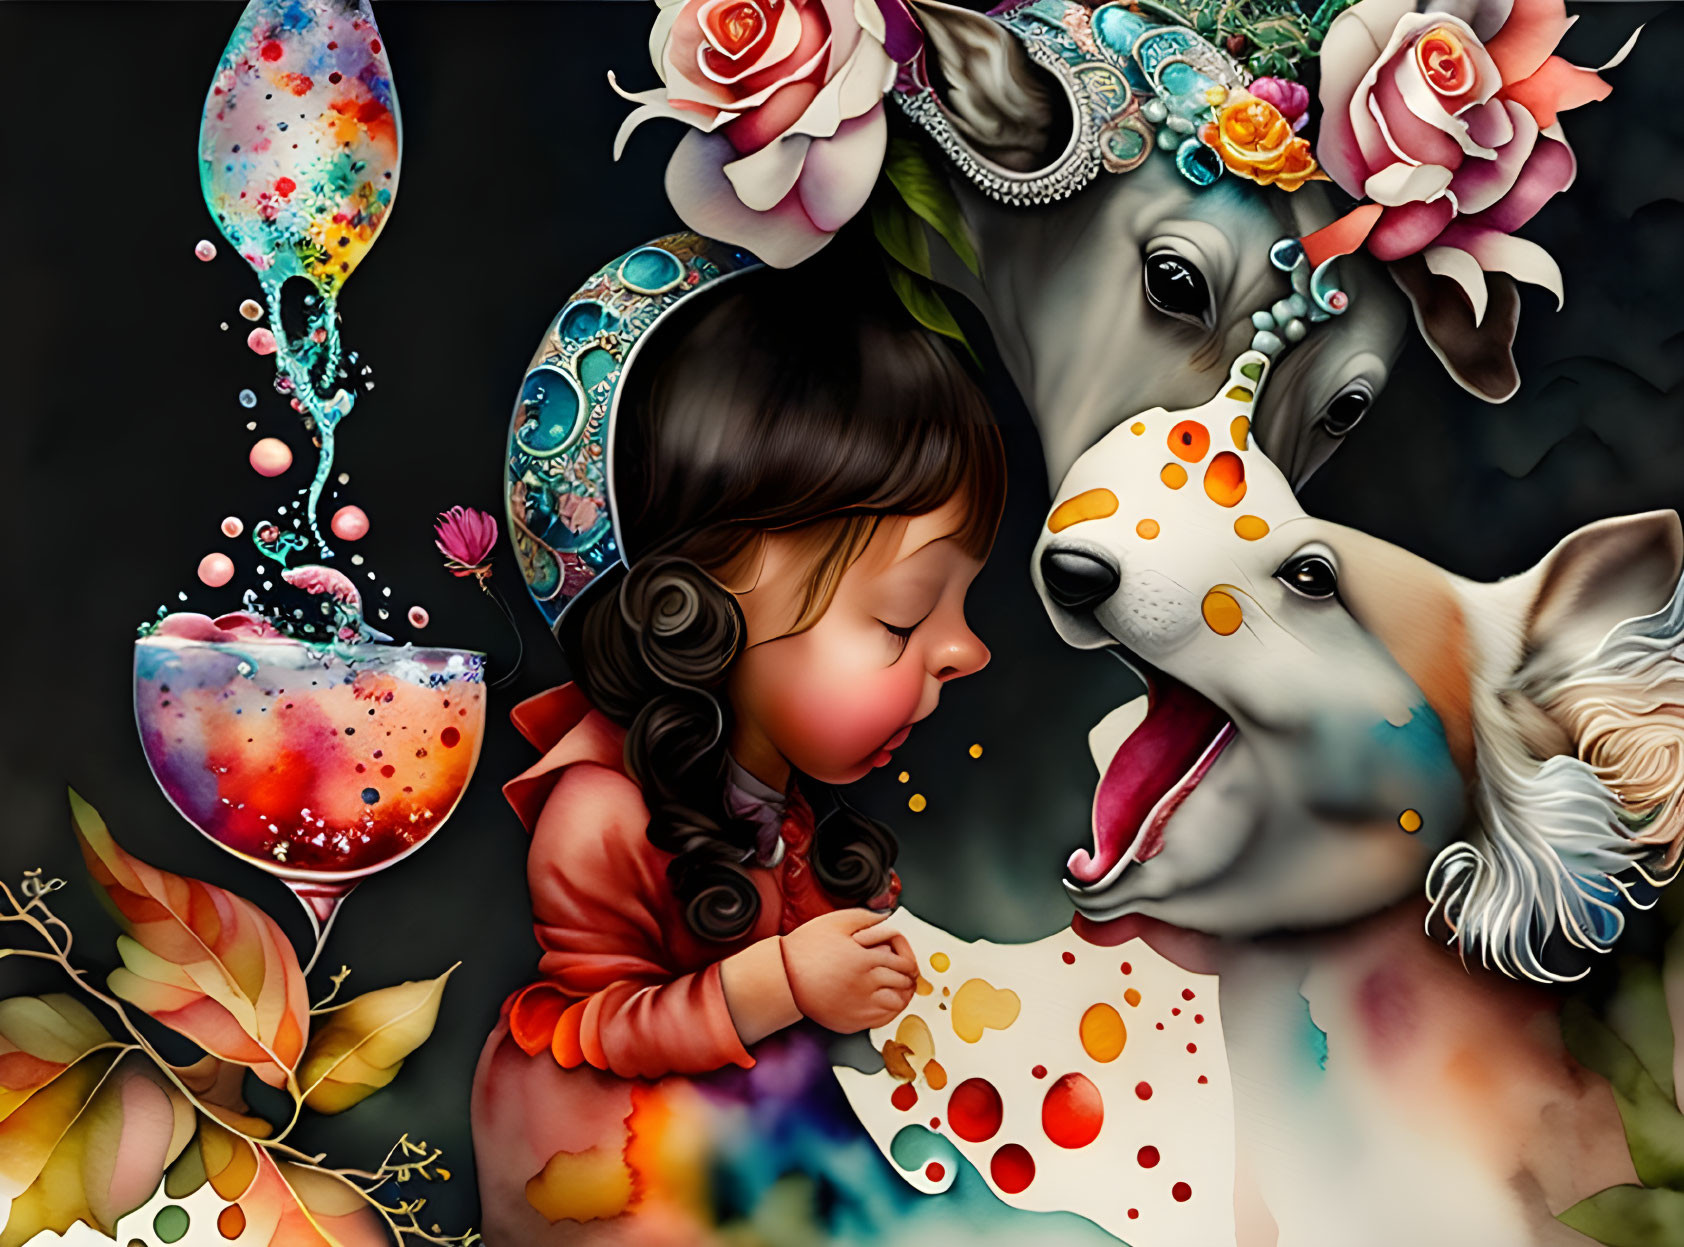 Colorful whimsical artwork: girl and dog with floral headband in imaginative moment with floating liquid.